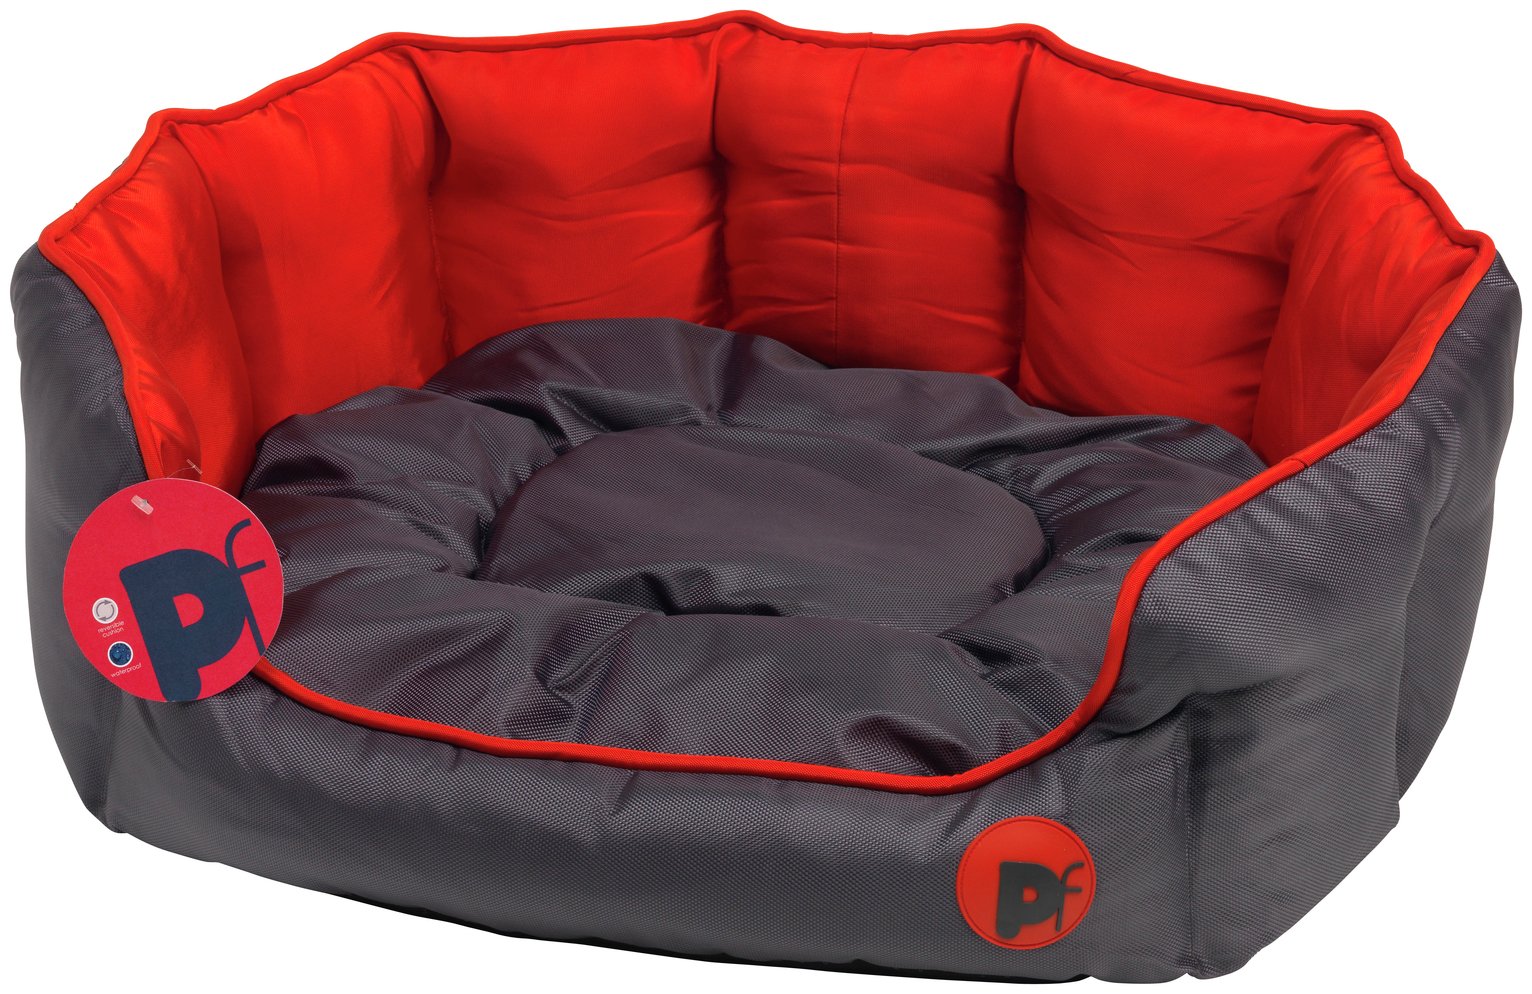 Petface Red Oxford Dog Bed - Medium